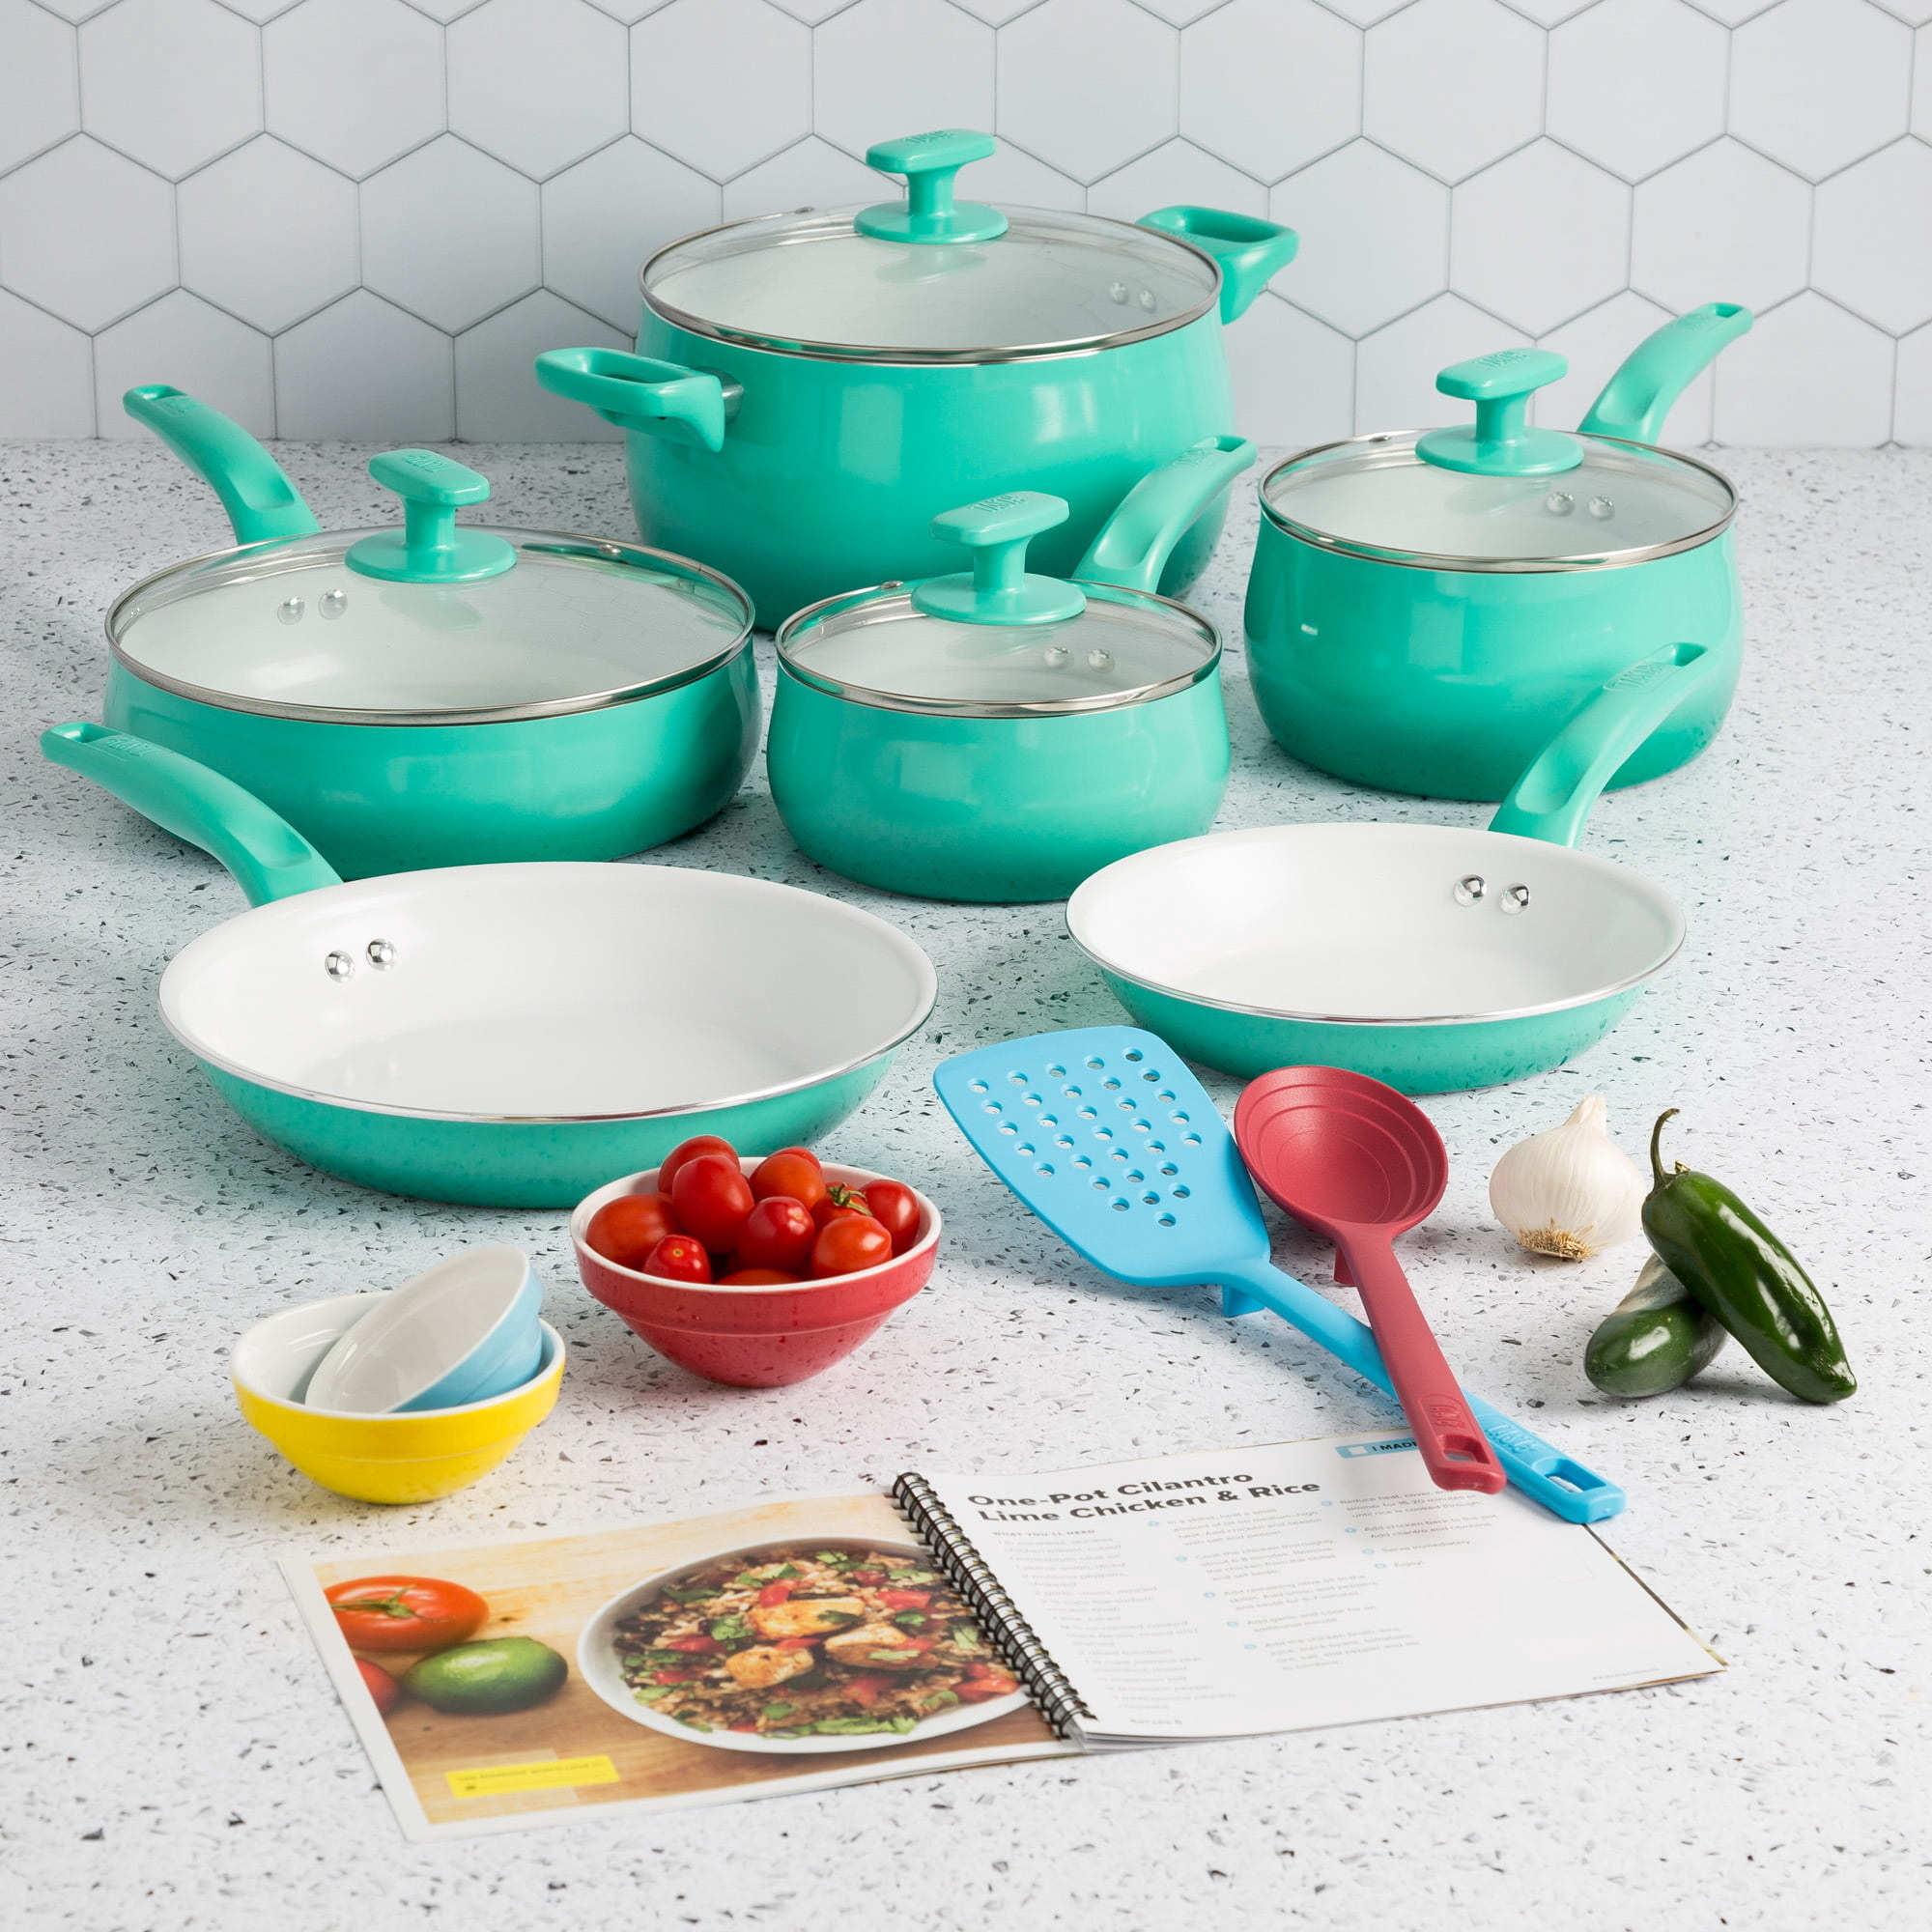 the ceramic cookware set in mint green with multicolored accessories